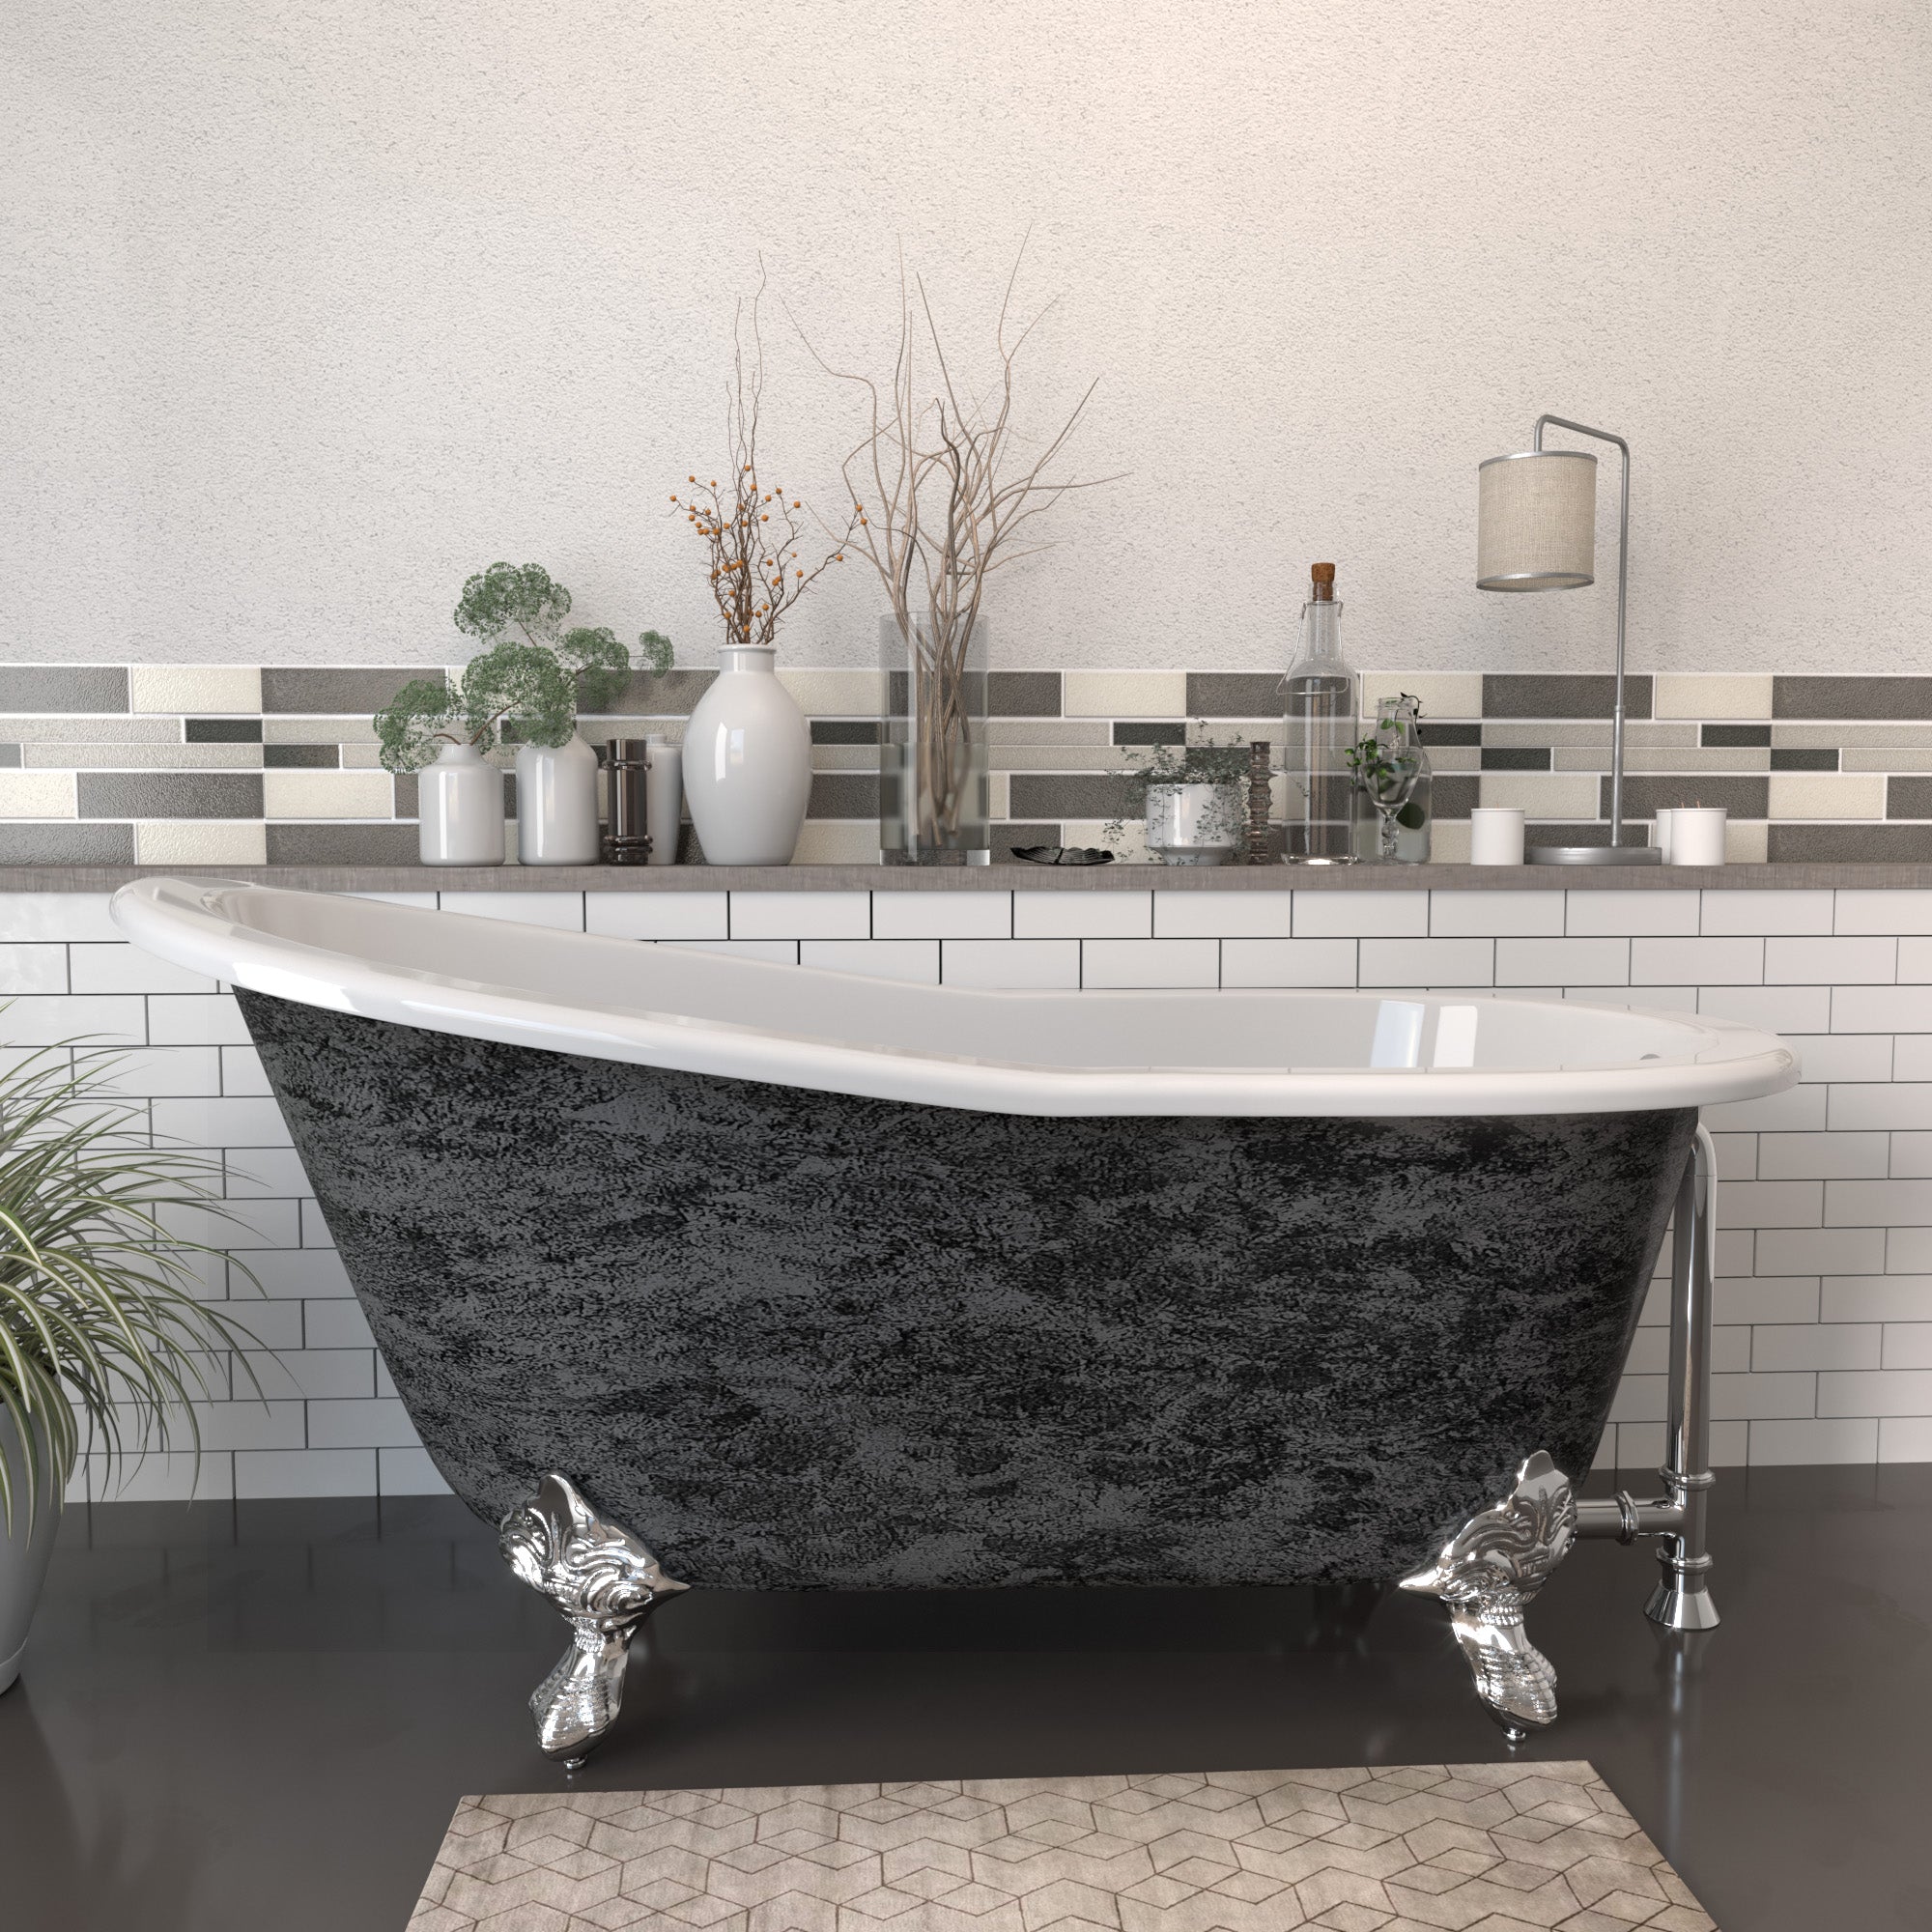 Cambridge Plumbing 61” x 30” Slipper Scorched Platinum Cast Iron Bathtub (Hand Painted Faux Scorched Platinum Exterior) with Feet (Brushed Nickel) and No Faucet Holes ST61-NH-SP - Vital Hydrotherapy